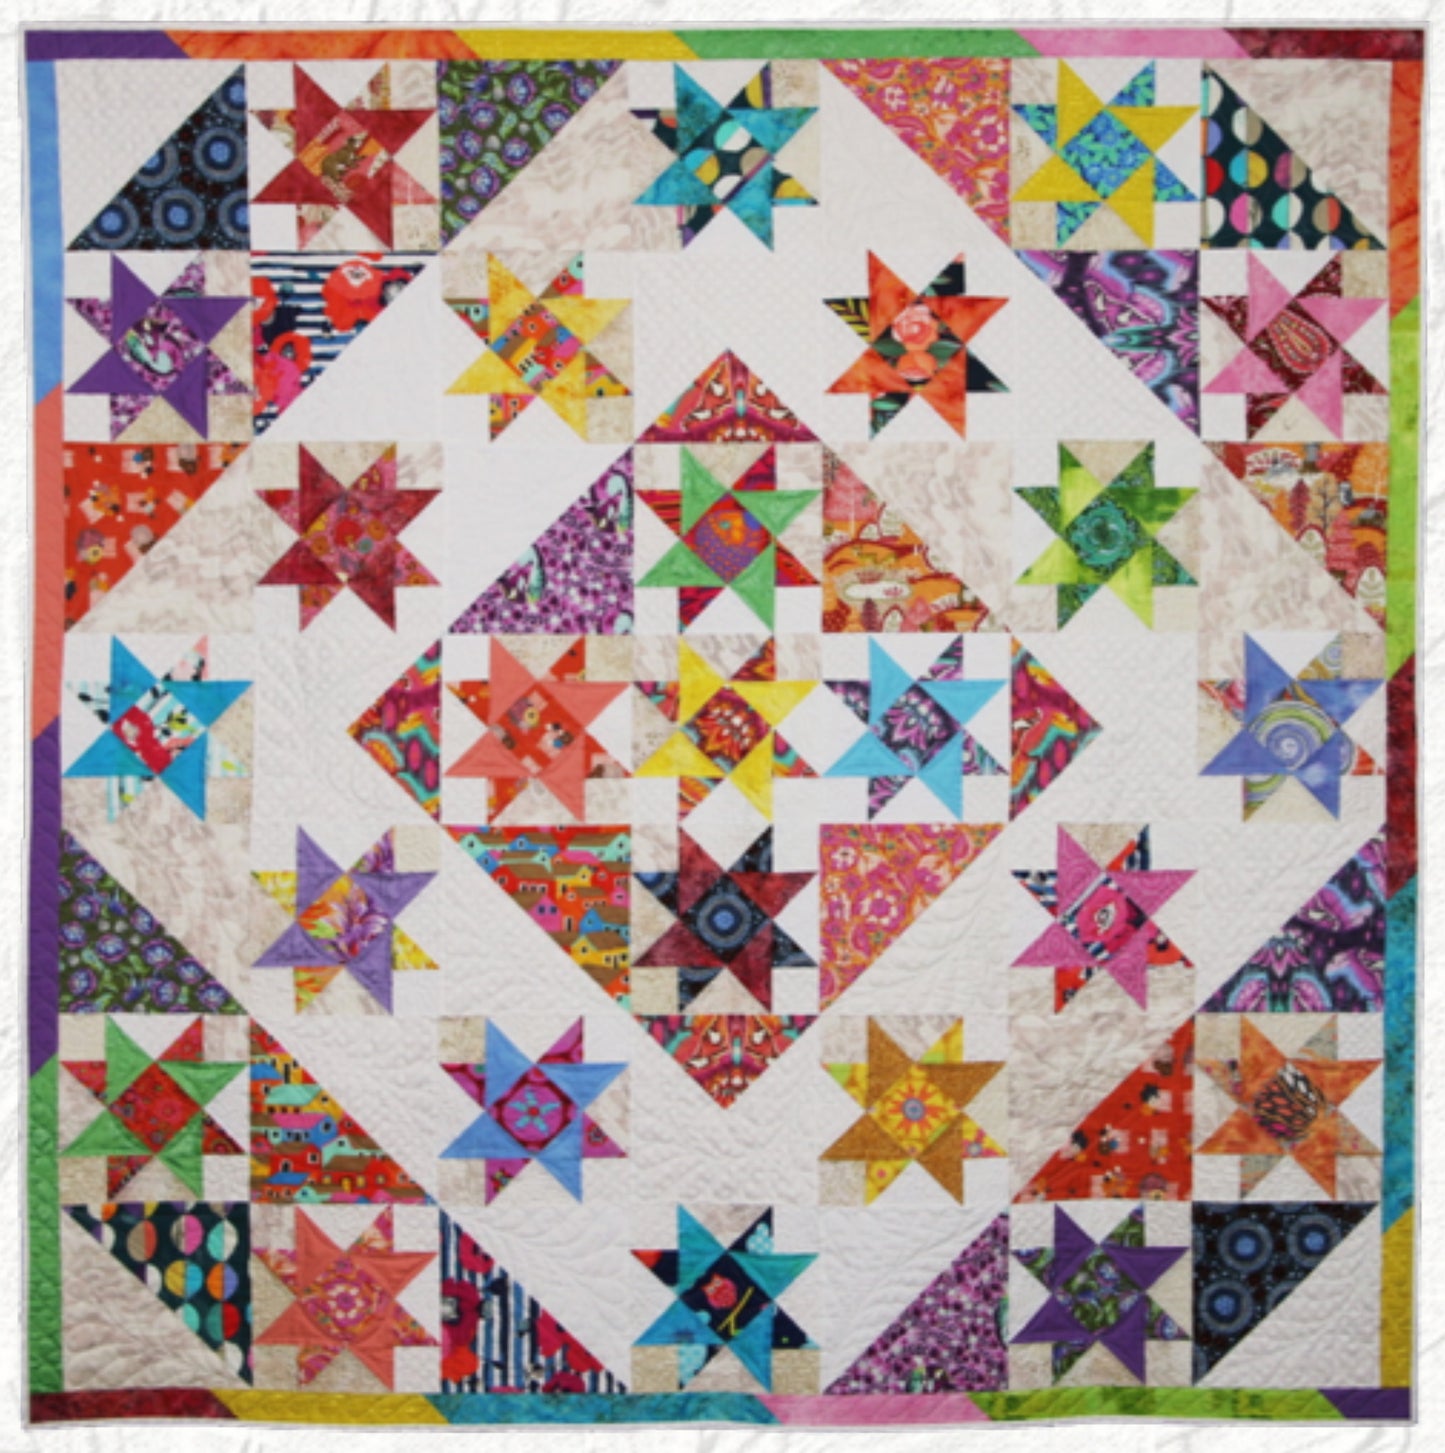 Star Carousel Quilt PAD-150e - Downloadable Pattern